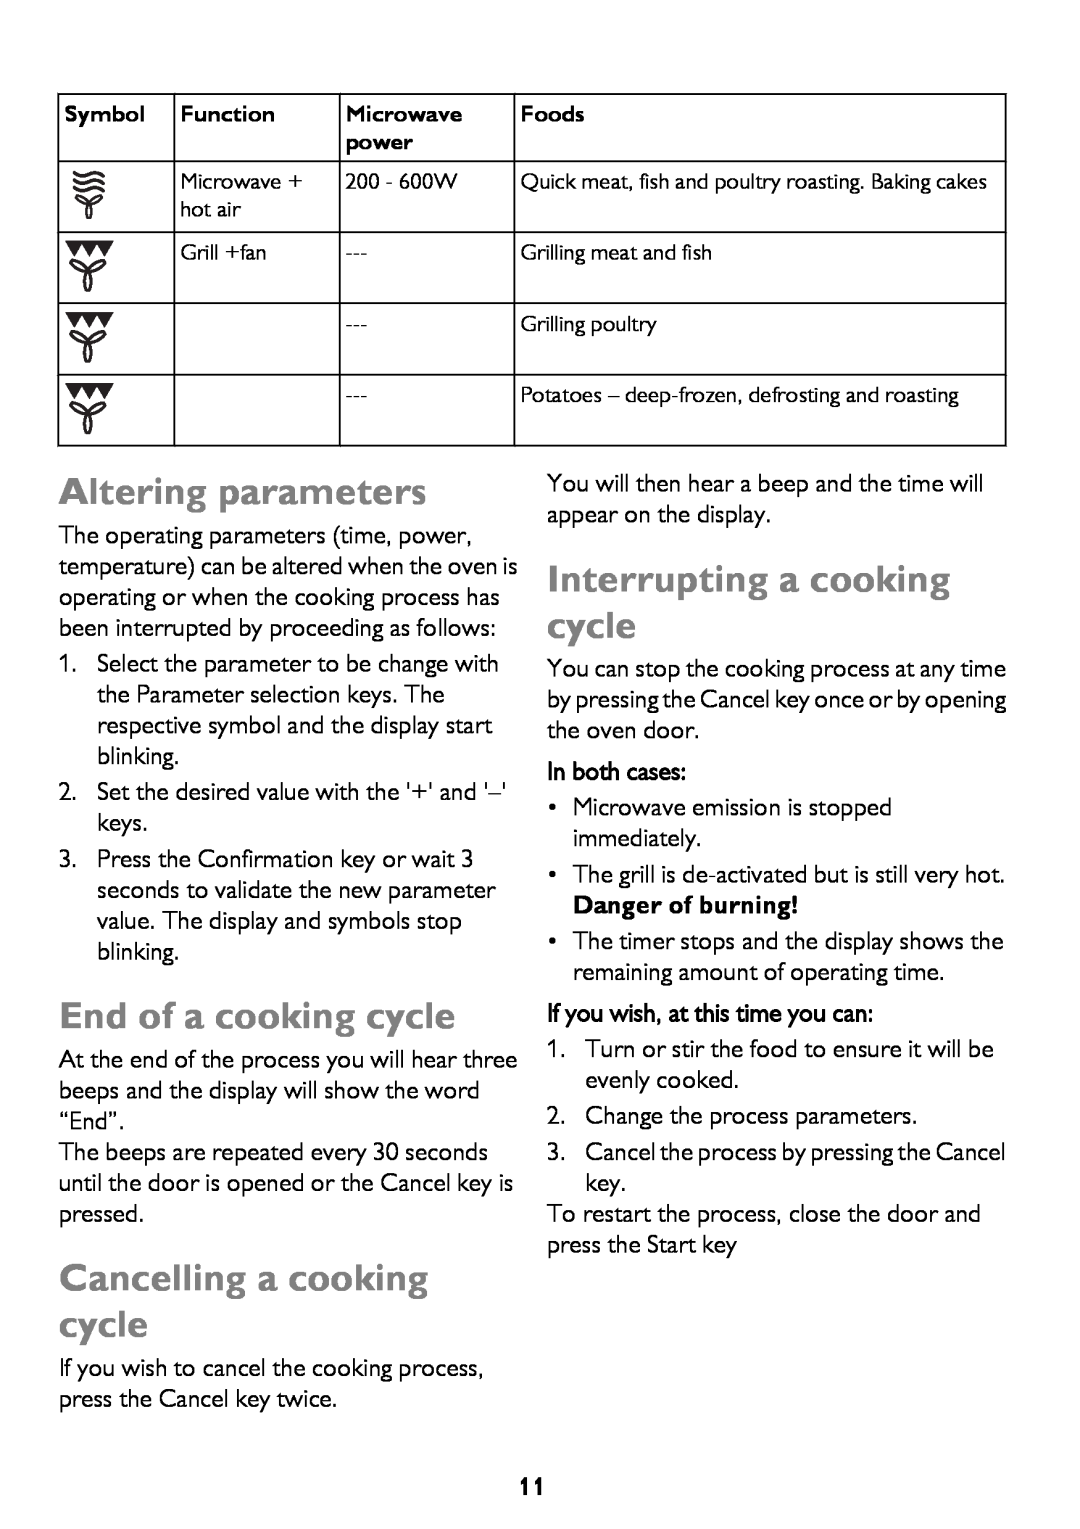 John Lewis JLBICO2 Altering parameters, End of a cooking cycle, Cancelling a cooking cycle, Interrupting a cooking cycle 